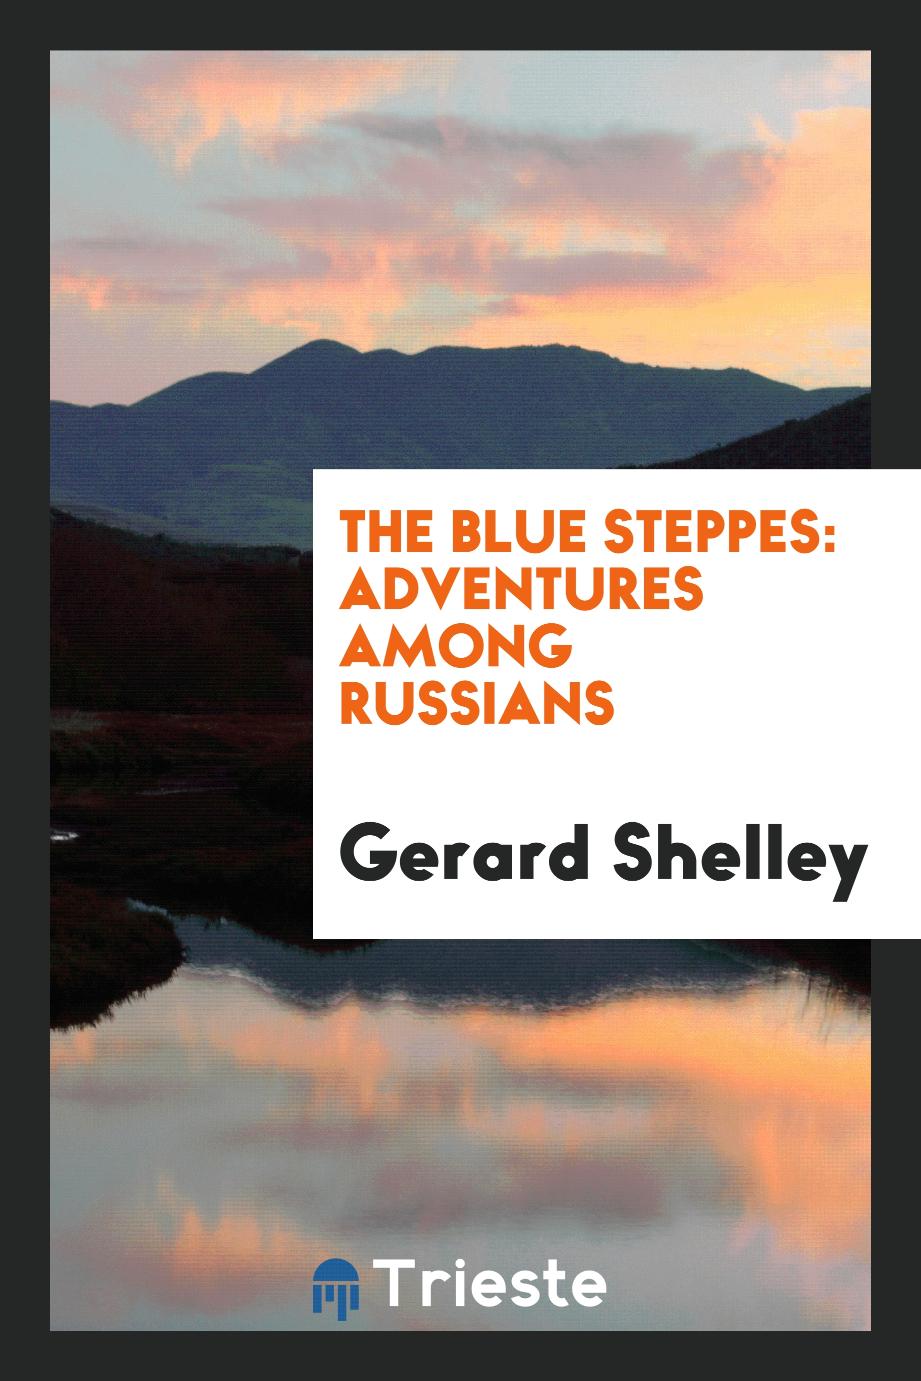 The blue steppes: adventures among Russians